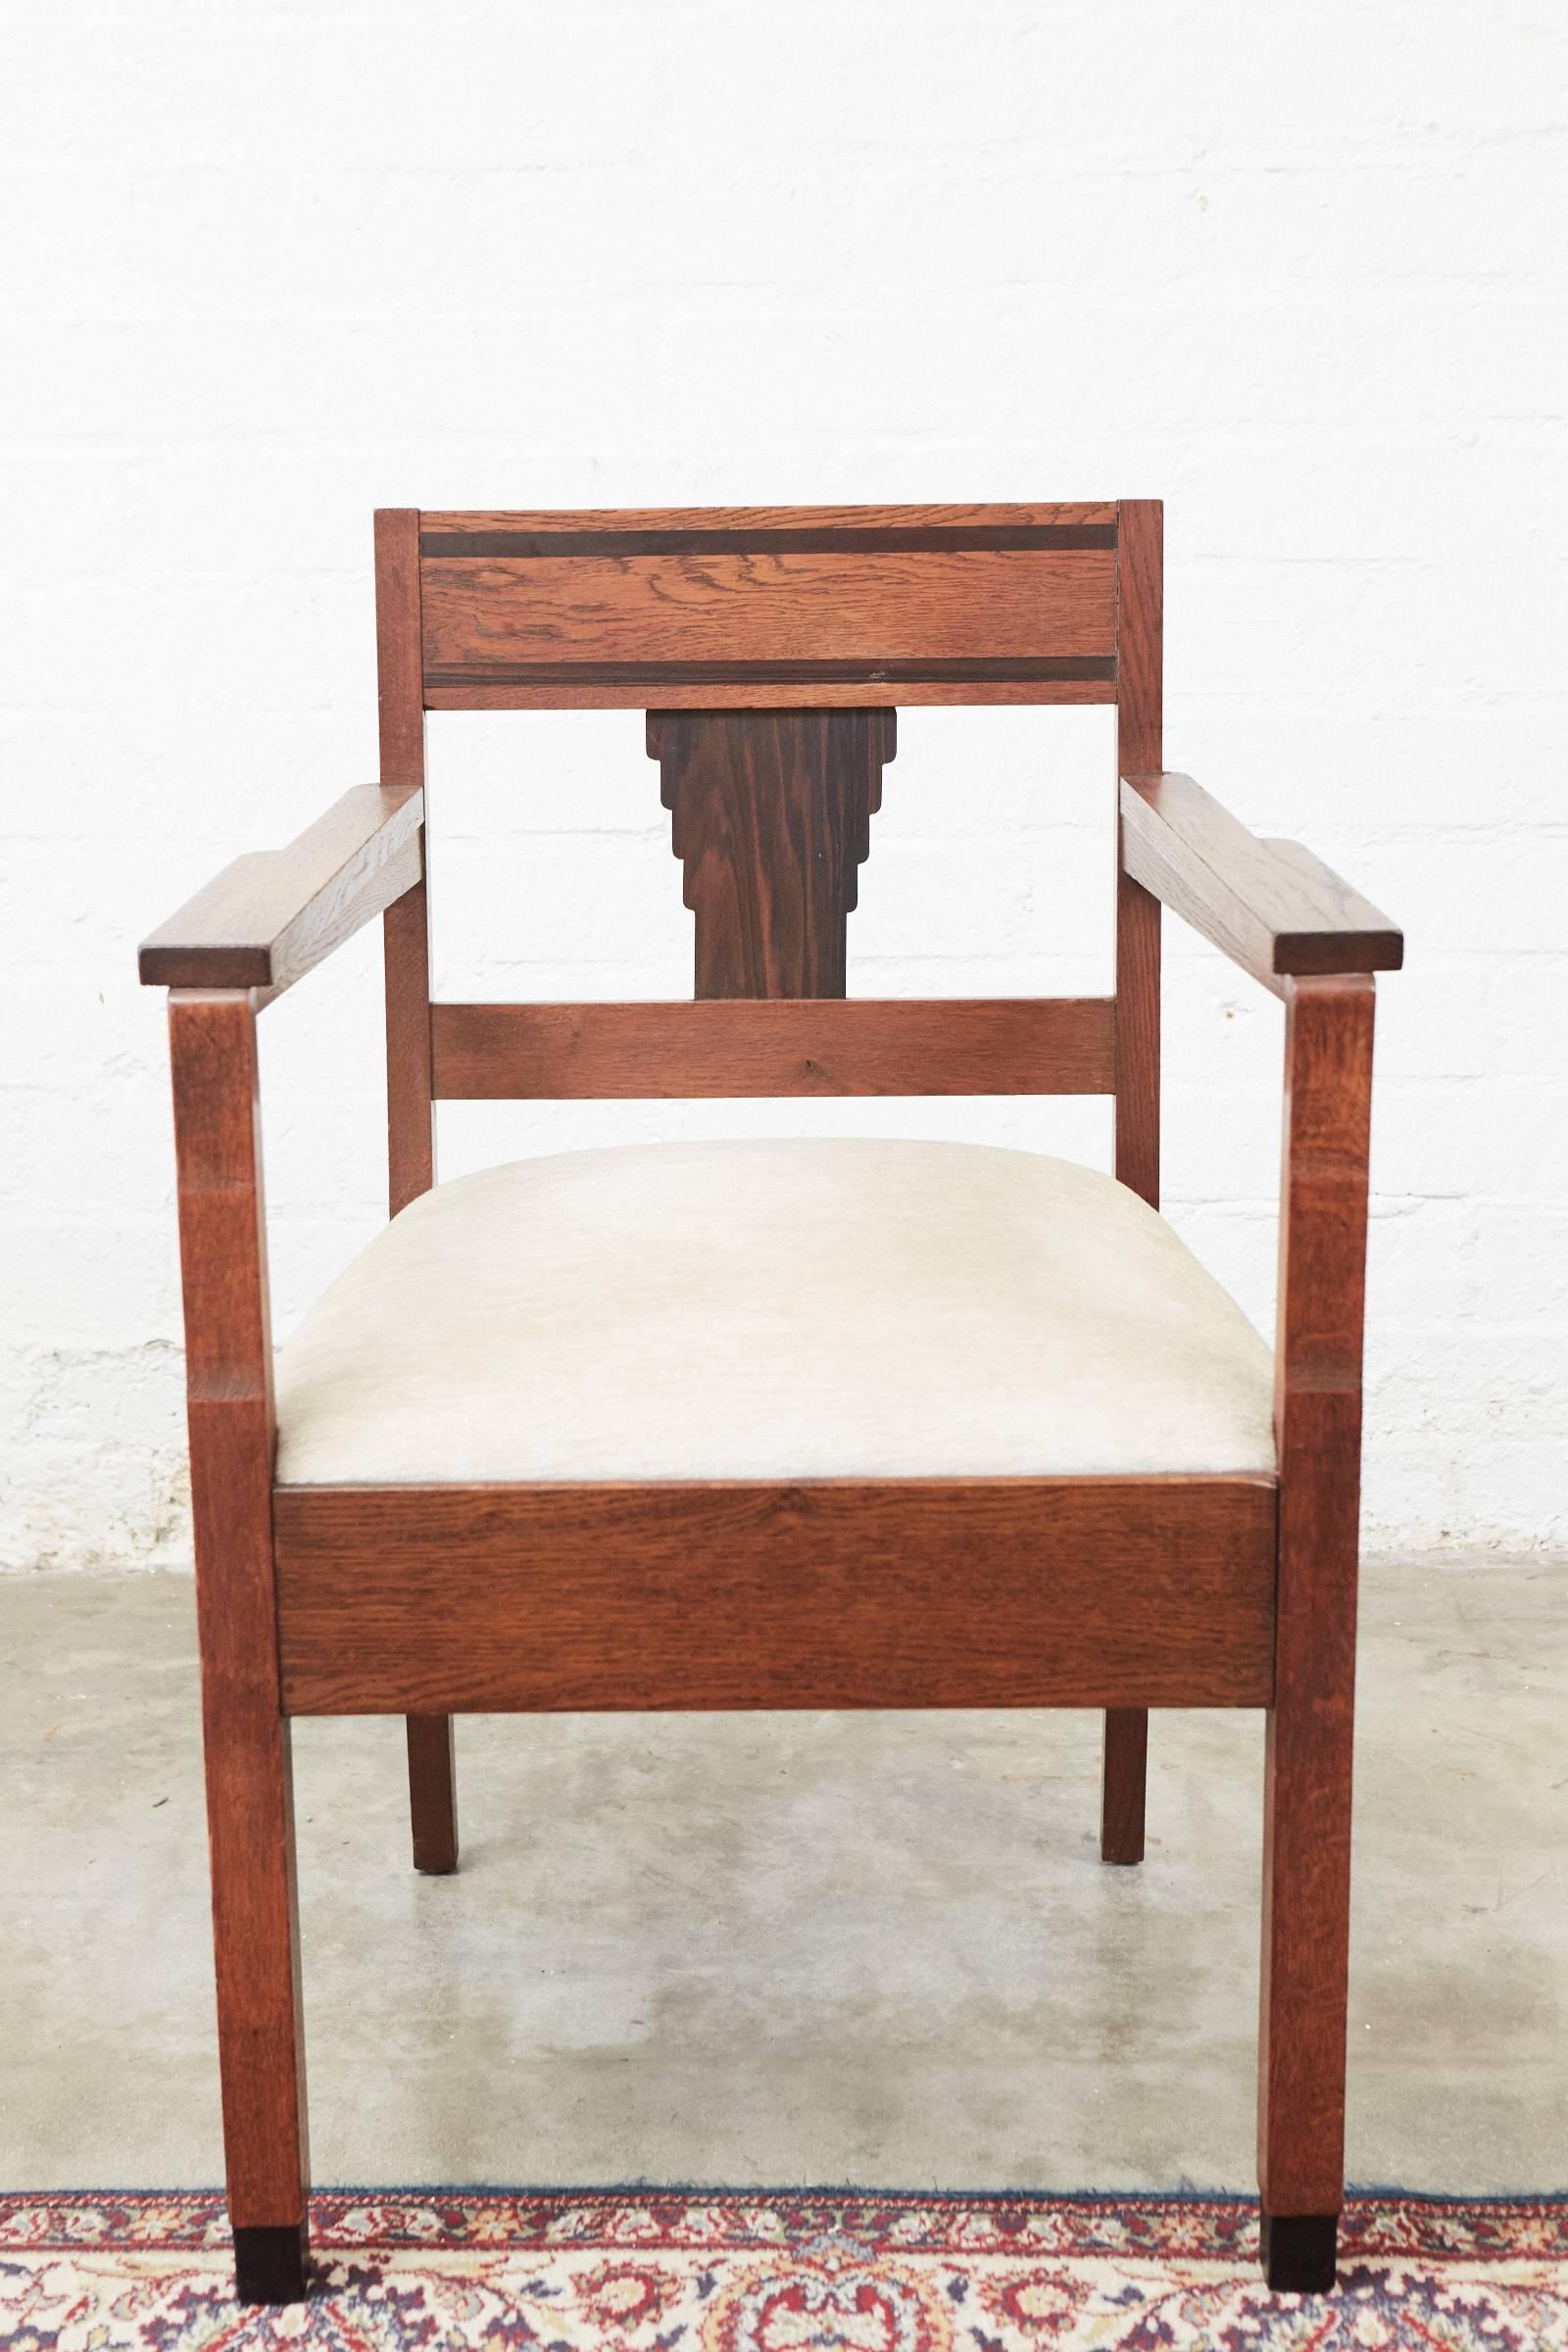 These chairs are made in oak with walnut inlay and a back panel. They have the characteristically geometric style of the furniture made as part of the Amsterdam School movement in the Netherlands (1910-1930).
       